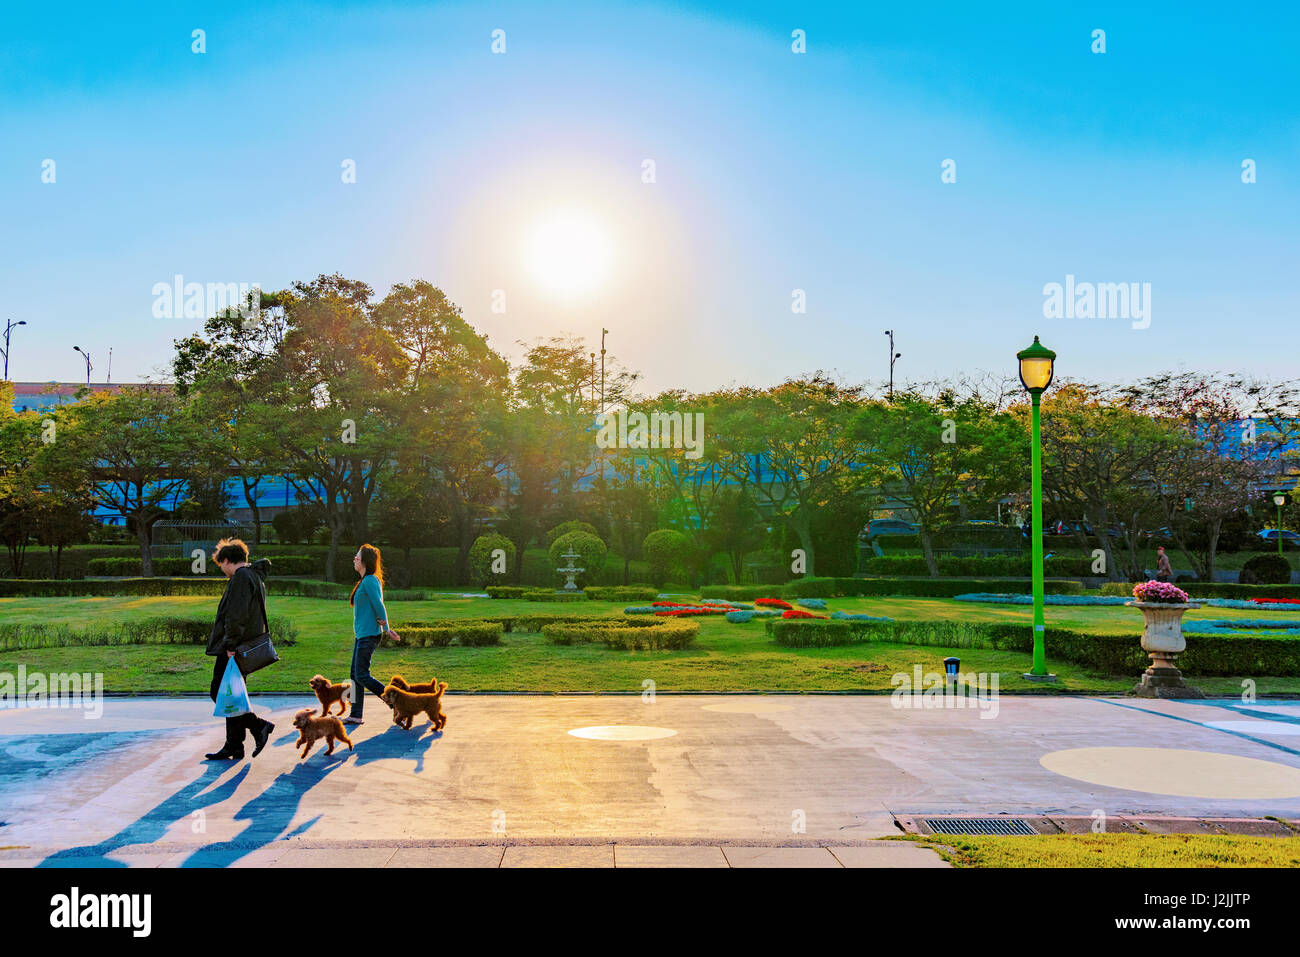 TAIPEI, TAIWAN - APRIL 03: Romantic sunset of people walking with group of small dogs in Taipei Expo park which is popular public park on April 03, 20 Stock Photo